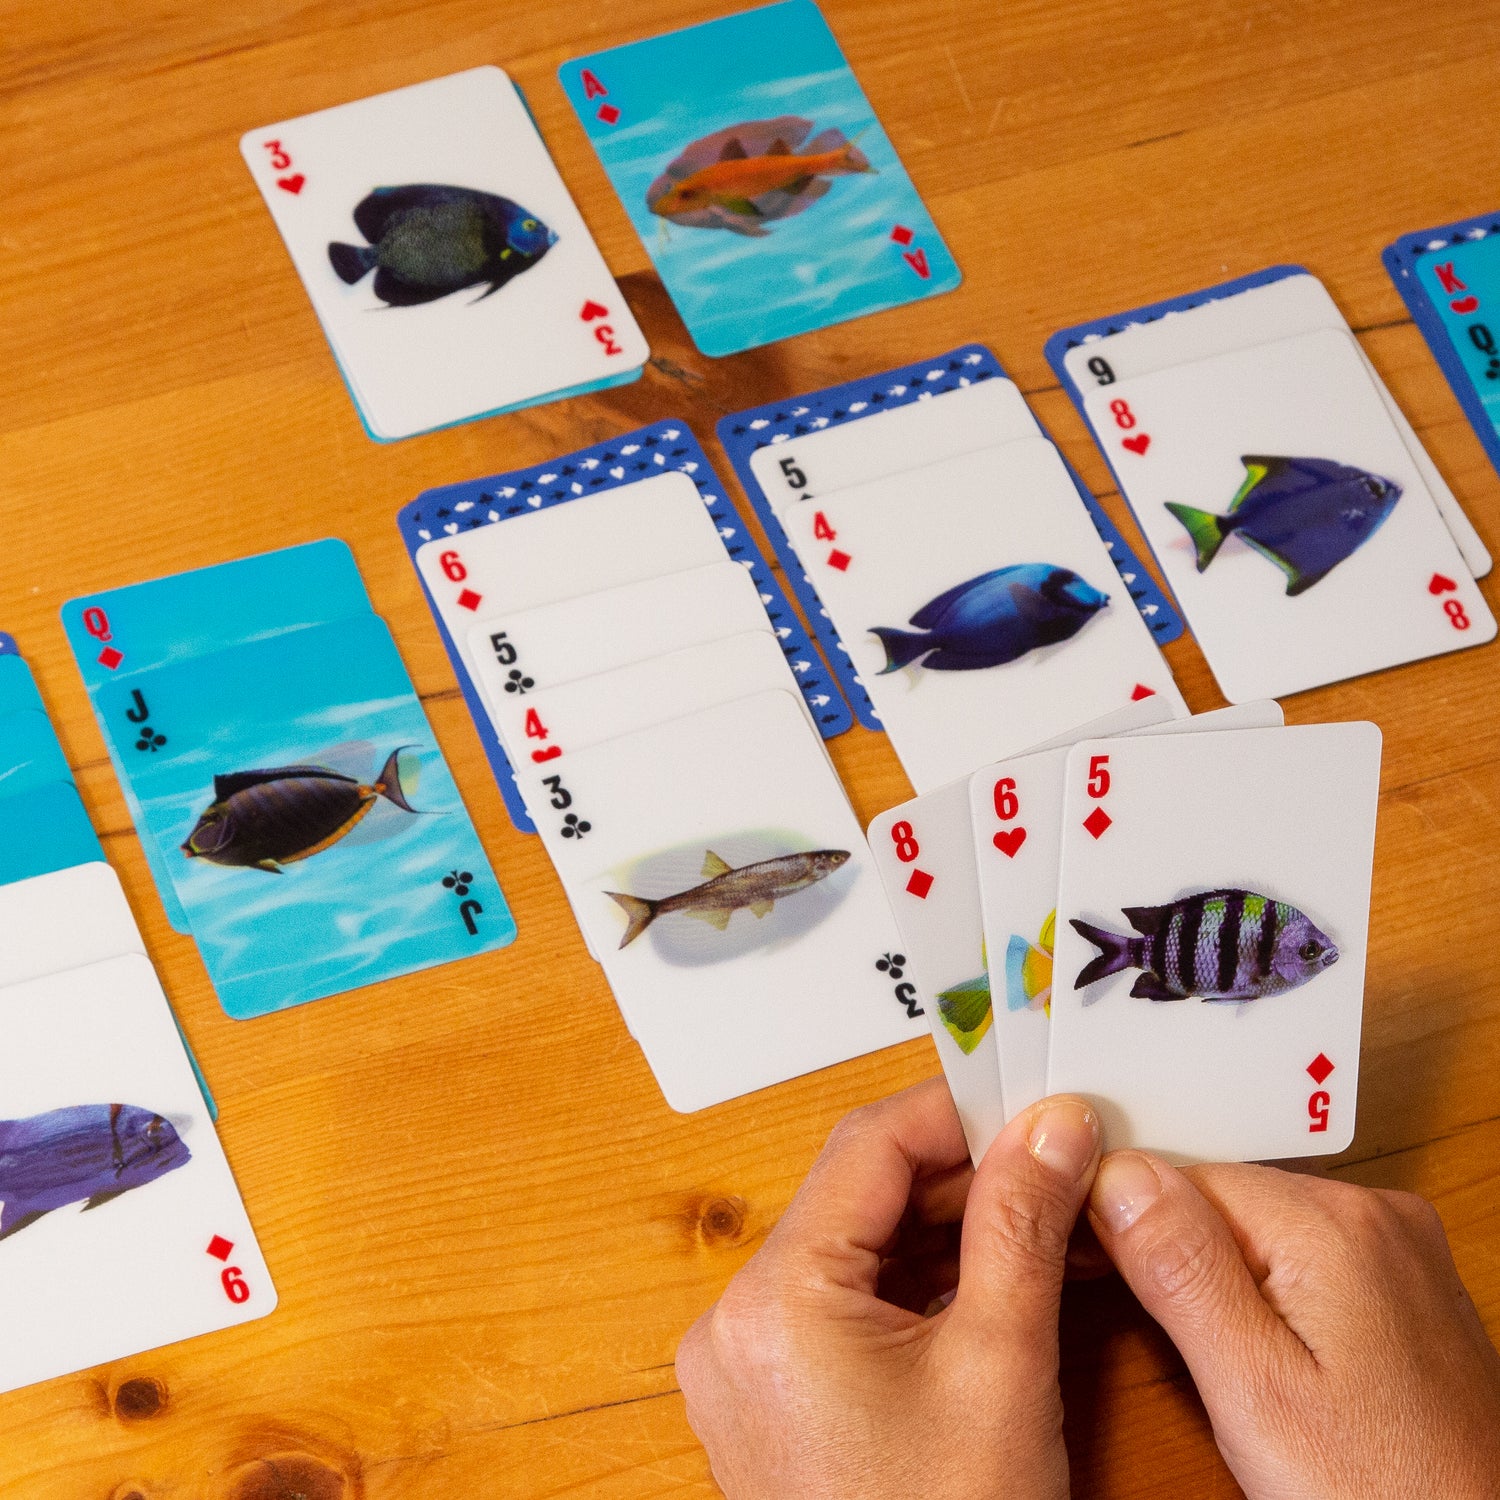 3-D Fish Cards